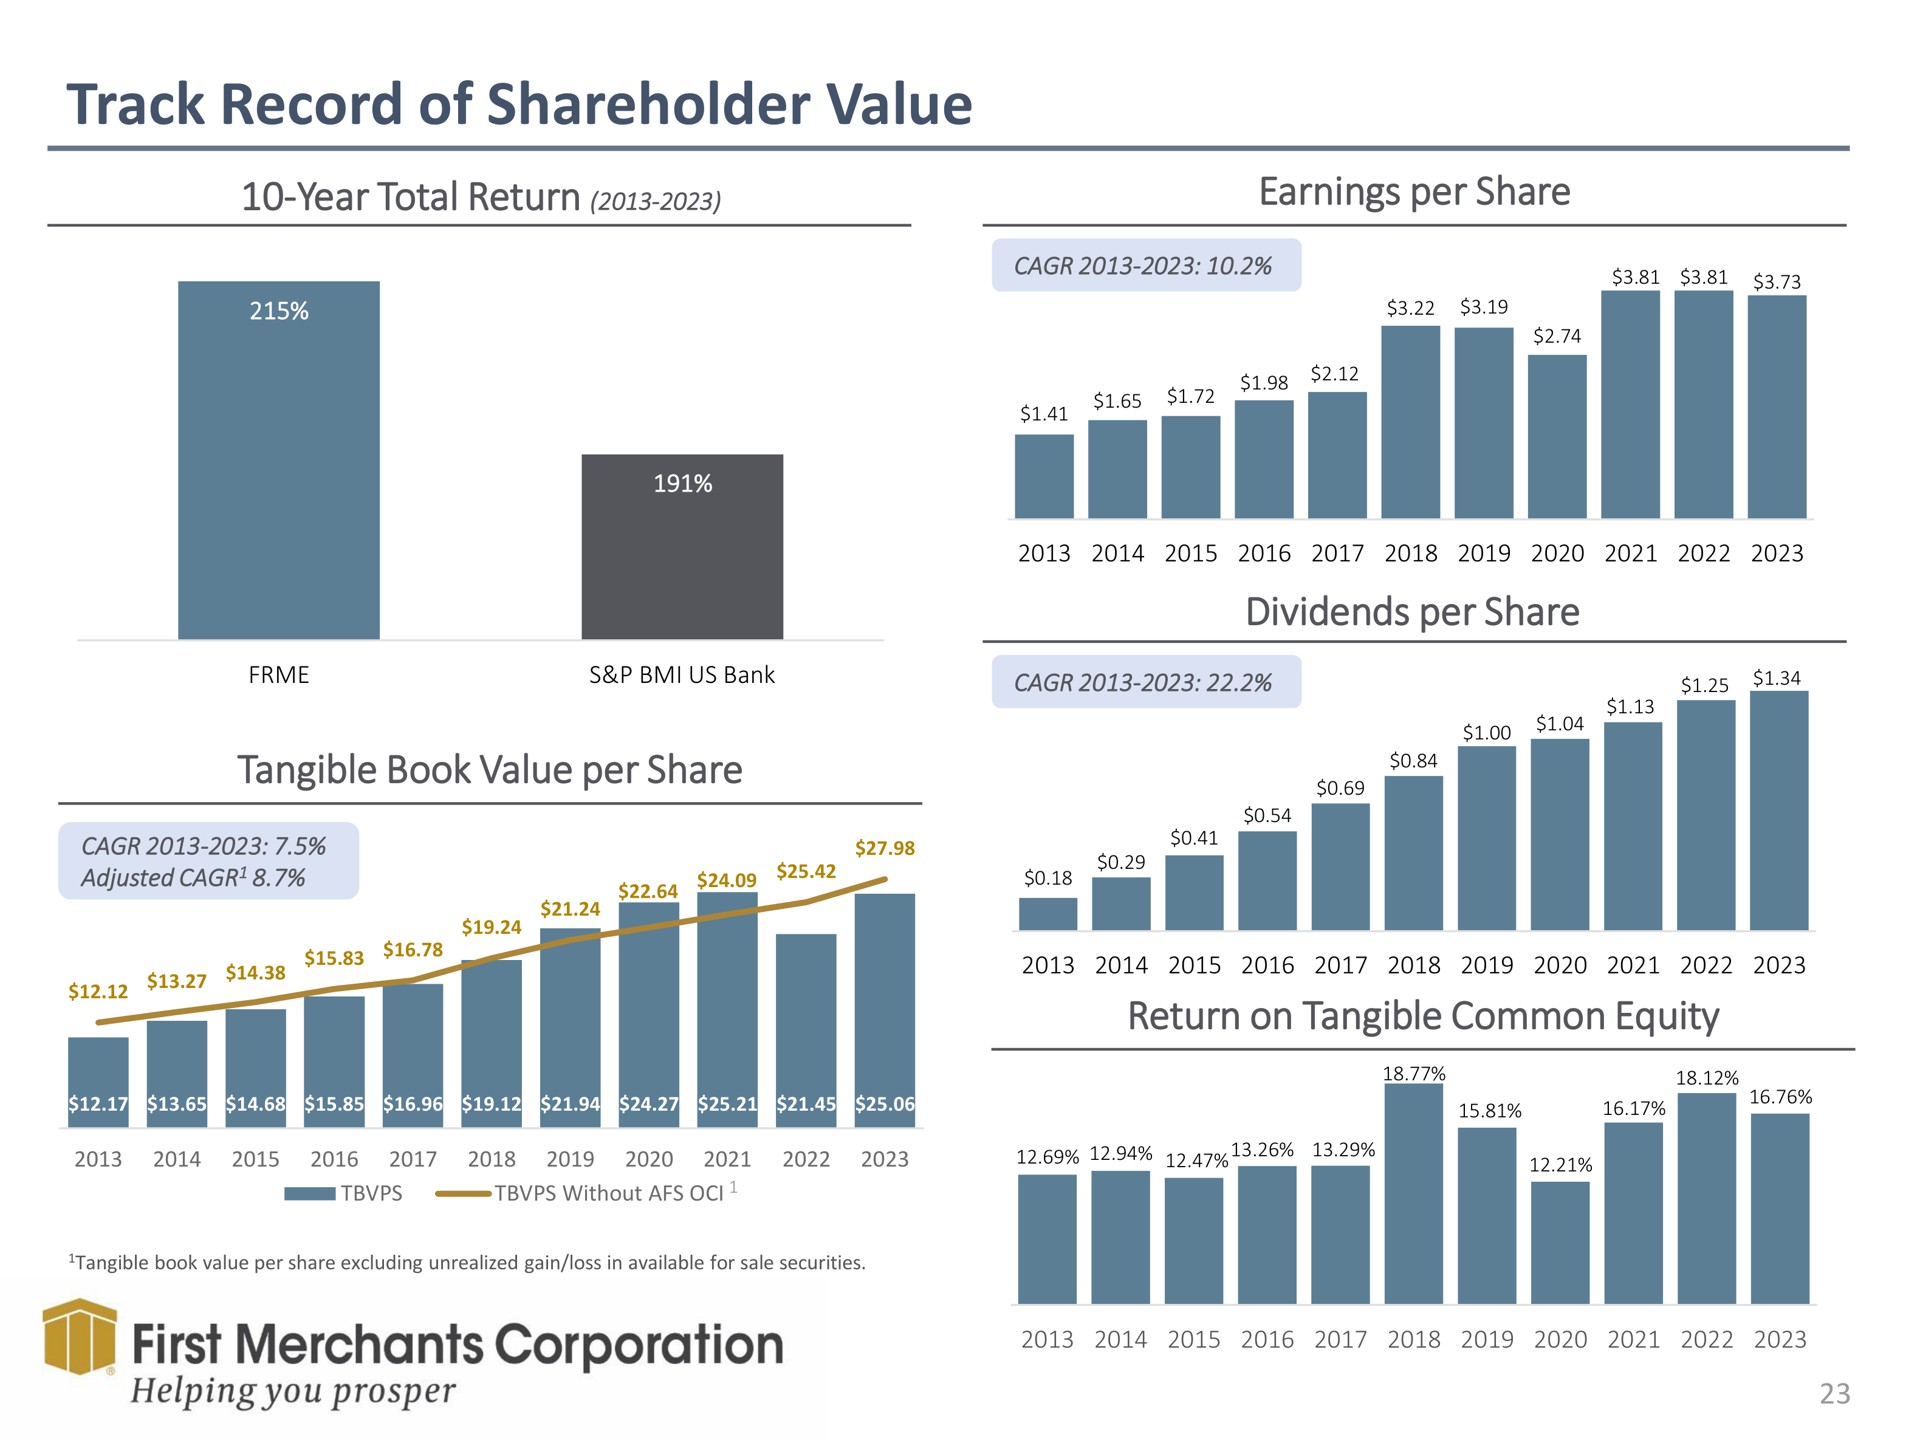 track record of shareholder value year total return earnings per share dividends per share tangible book value per share return on tangible common equity a helping you prosper | First Merchants